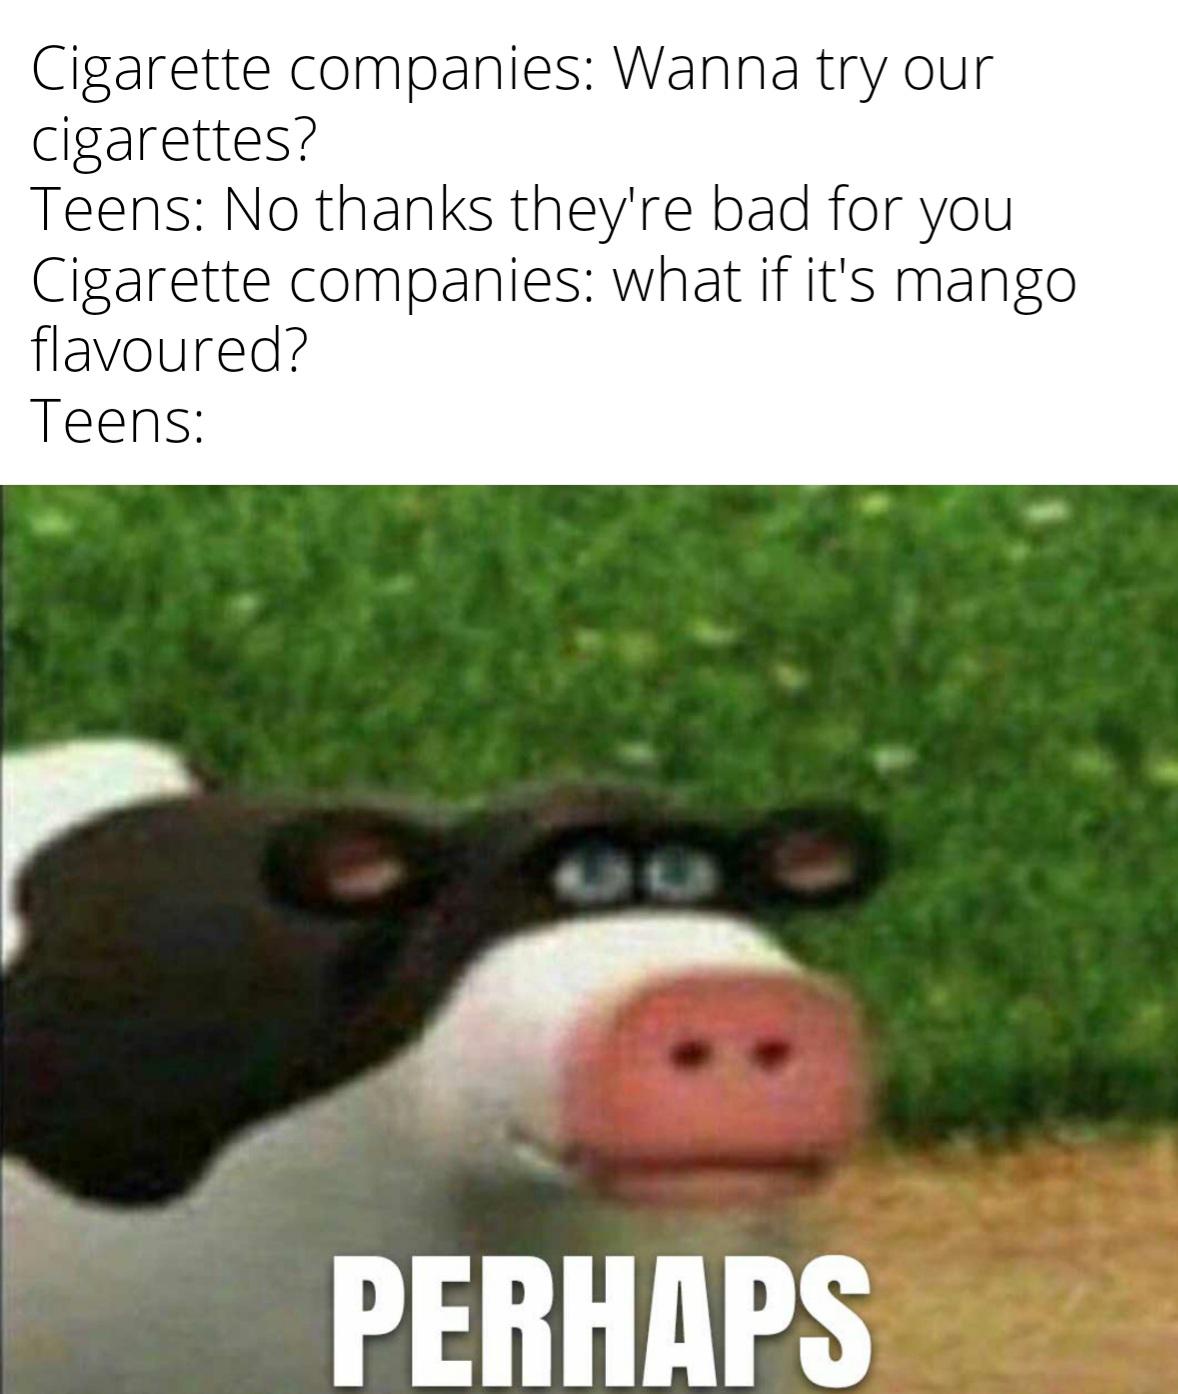 funny memes - dank memes - do you kiss your mother with that mouth meme - Cigarette companies Wanna try our cigarettes? Teens No thanks they're bad for you Cigarette companies what if it's mango flavoured? Teens Perhaps